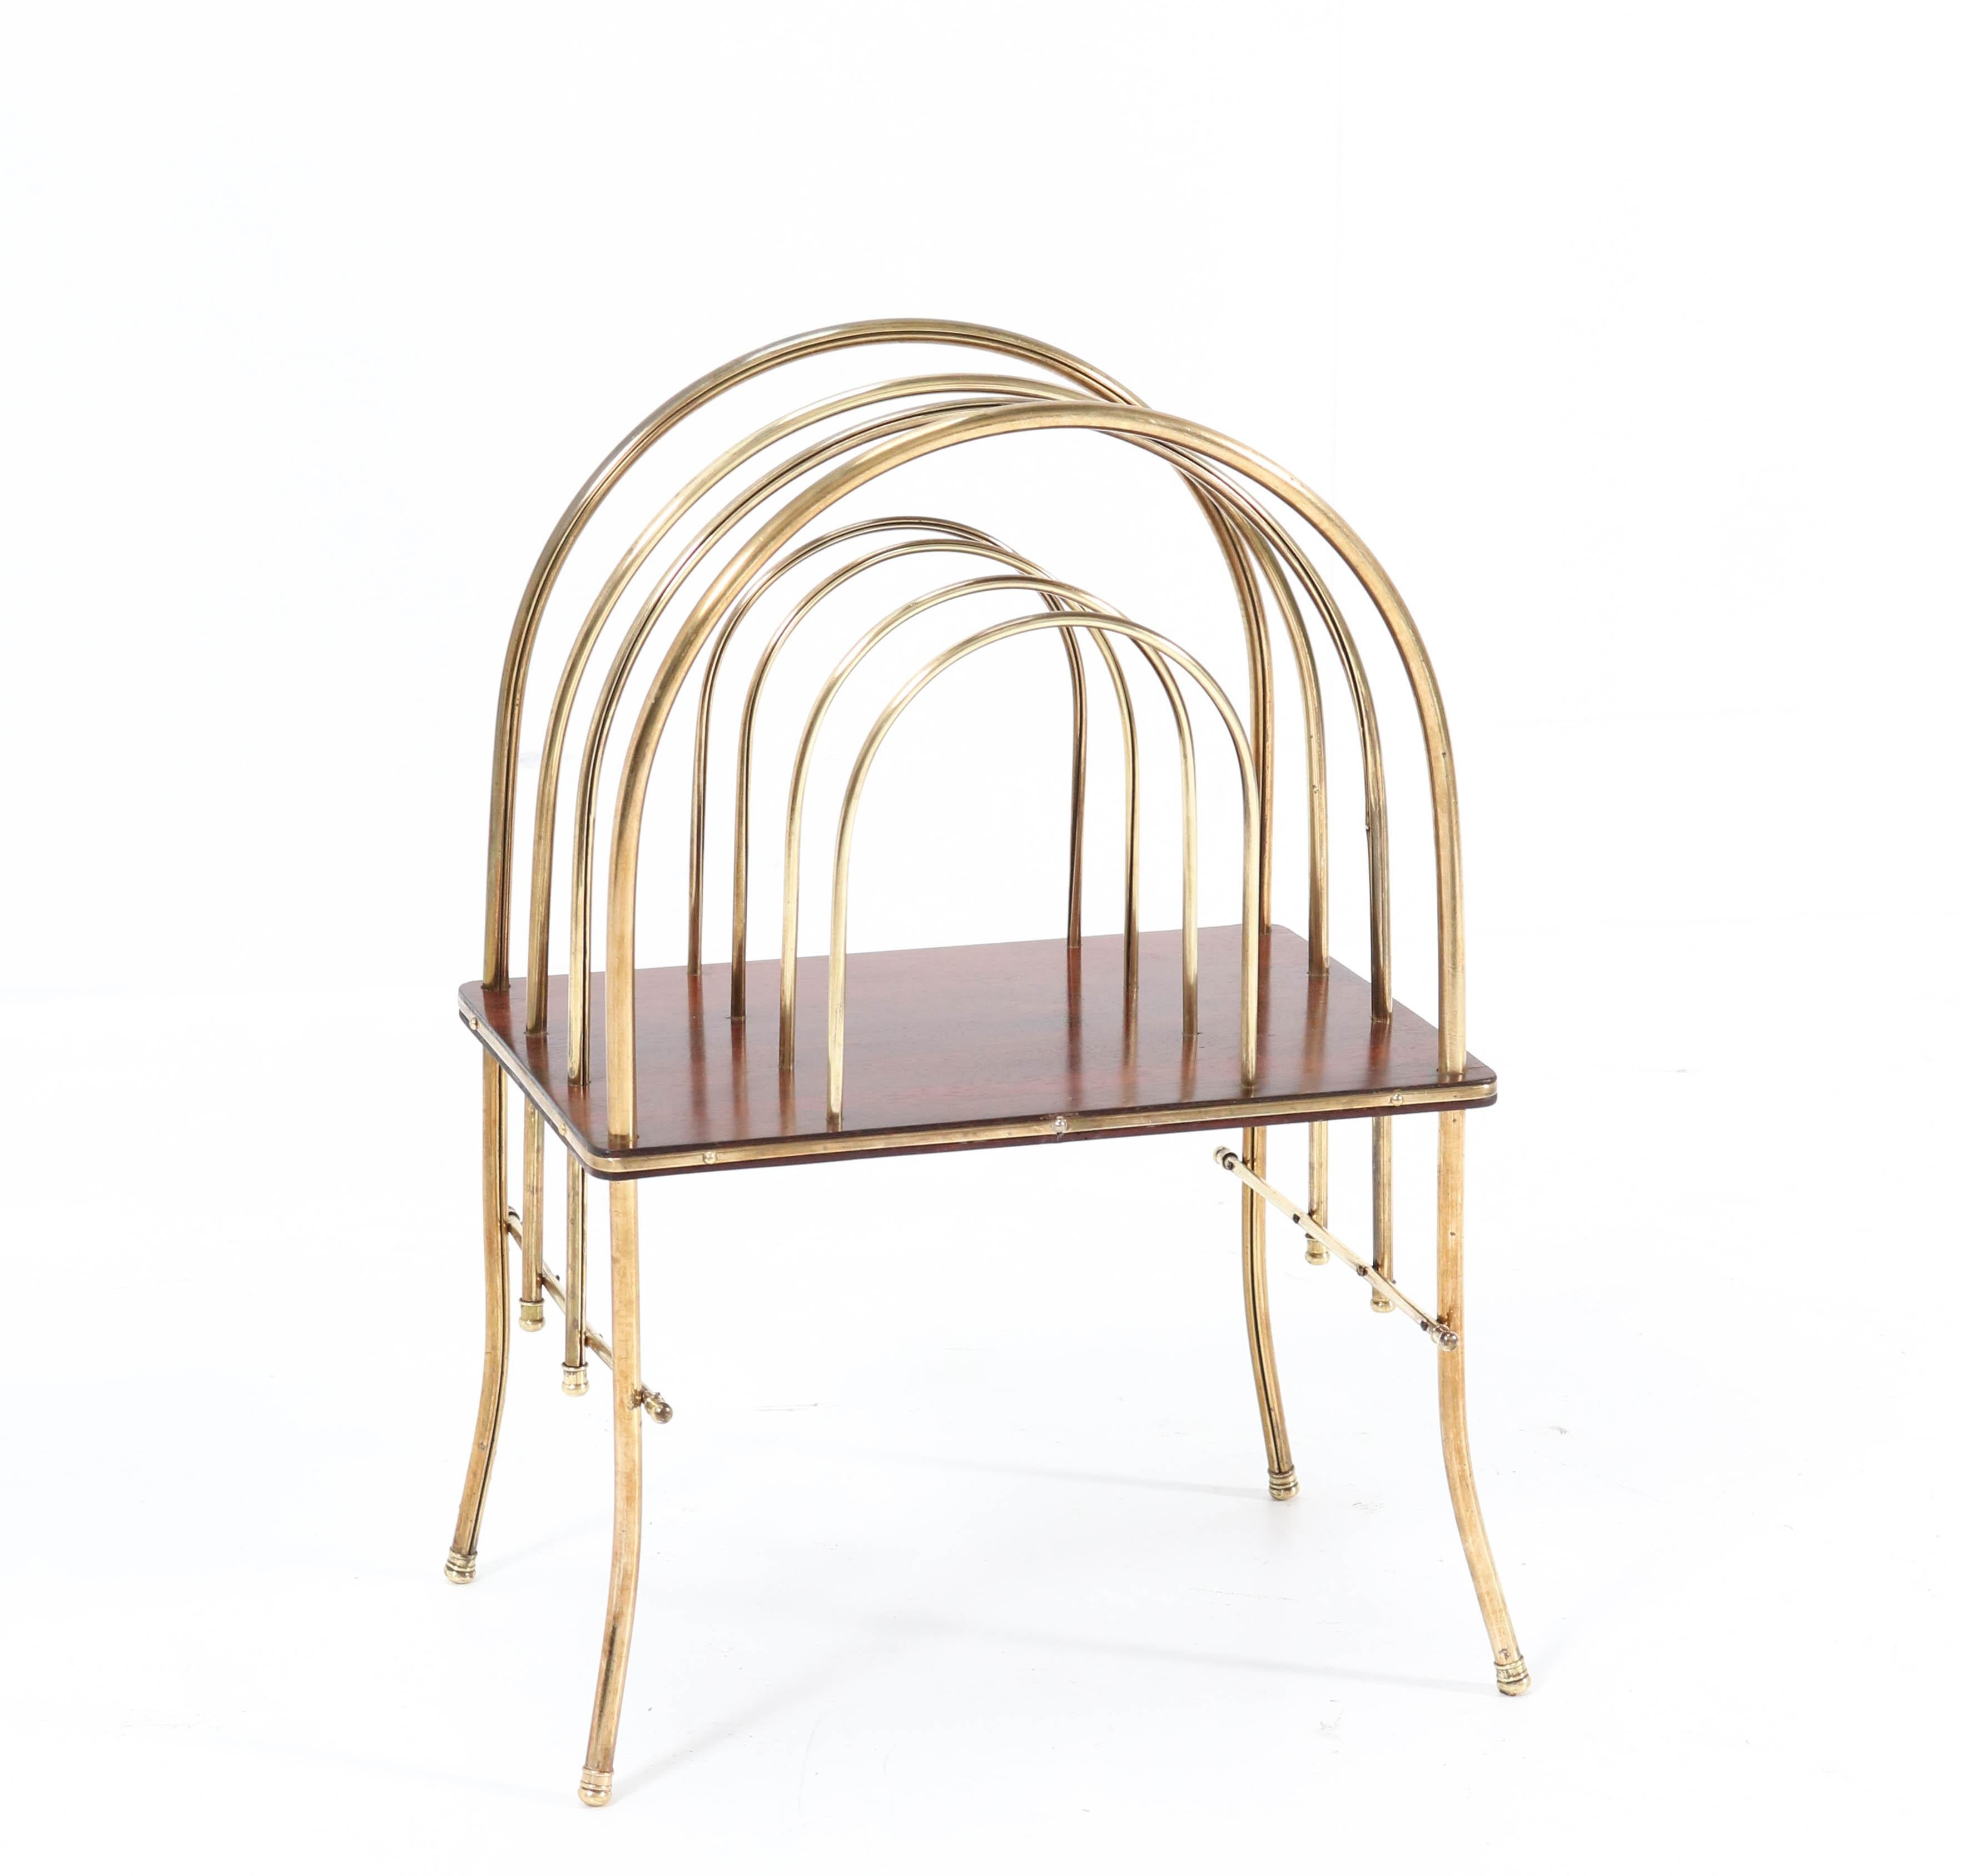 Wonderful Art Nouveau magazine rack.
Striking French design from the 1900s.
This stunning piece of furniture is manufactured in brass and mahogany.
In very good condition with a beautiful patina.